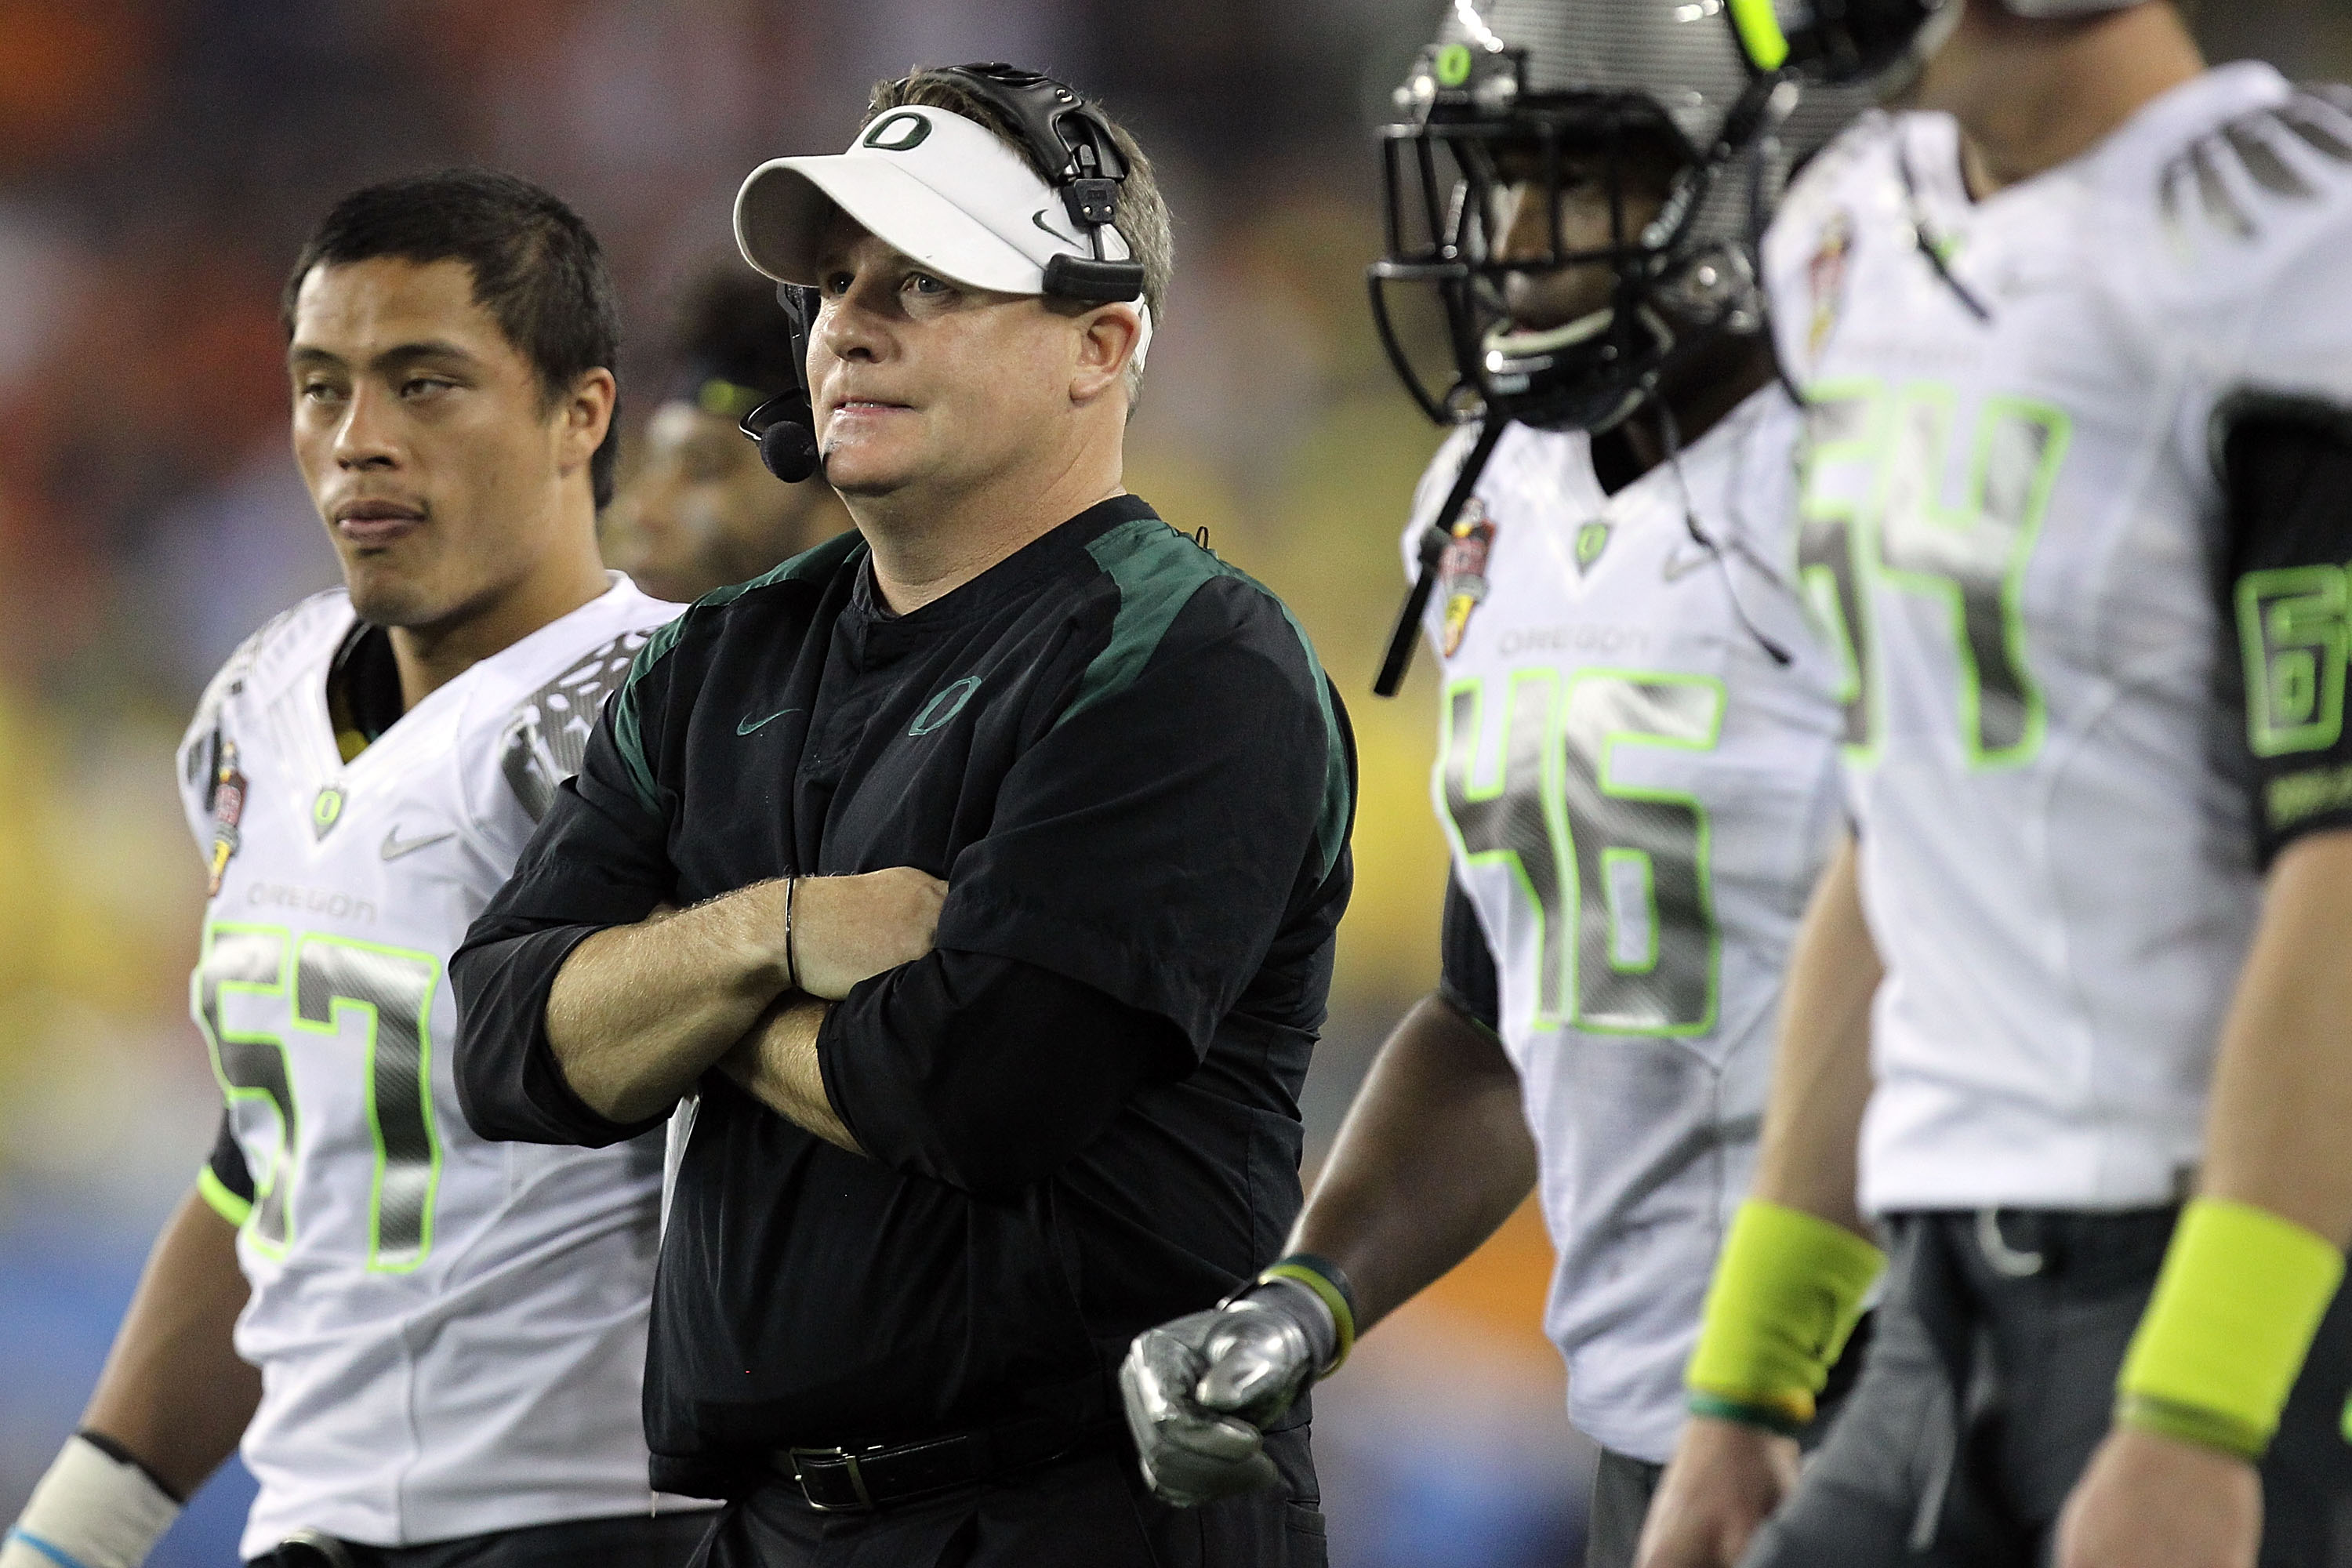 Chip Kelly And The 5 Greatest Football Coaches In Oregon Ducks History News Scores